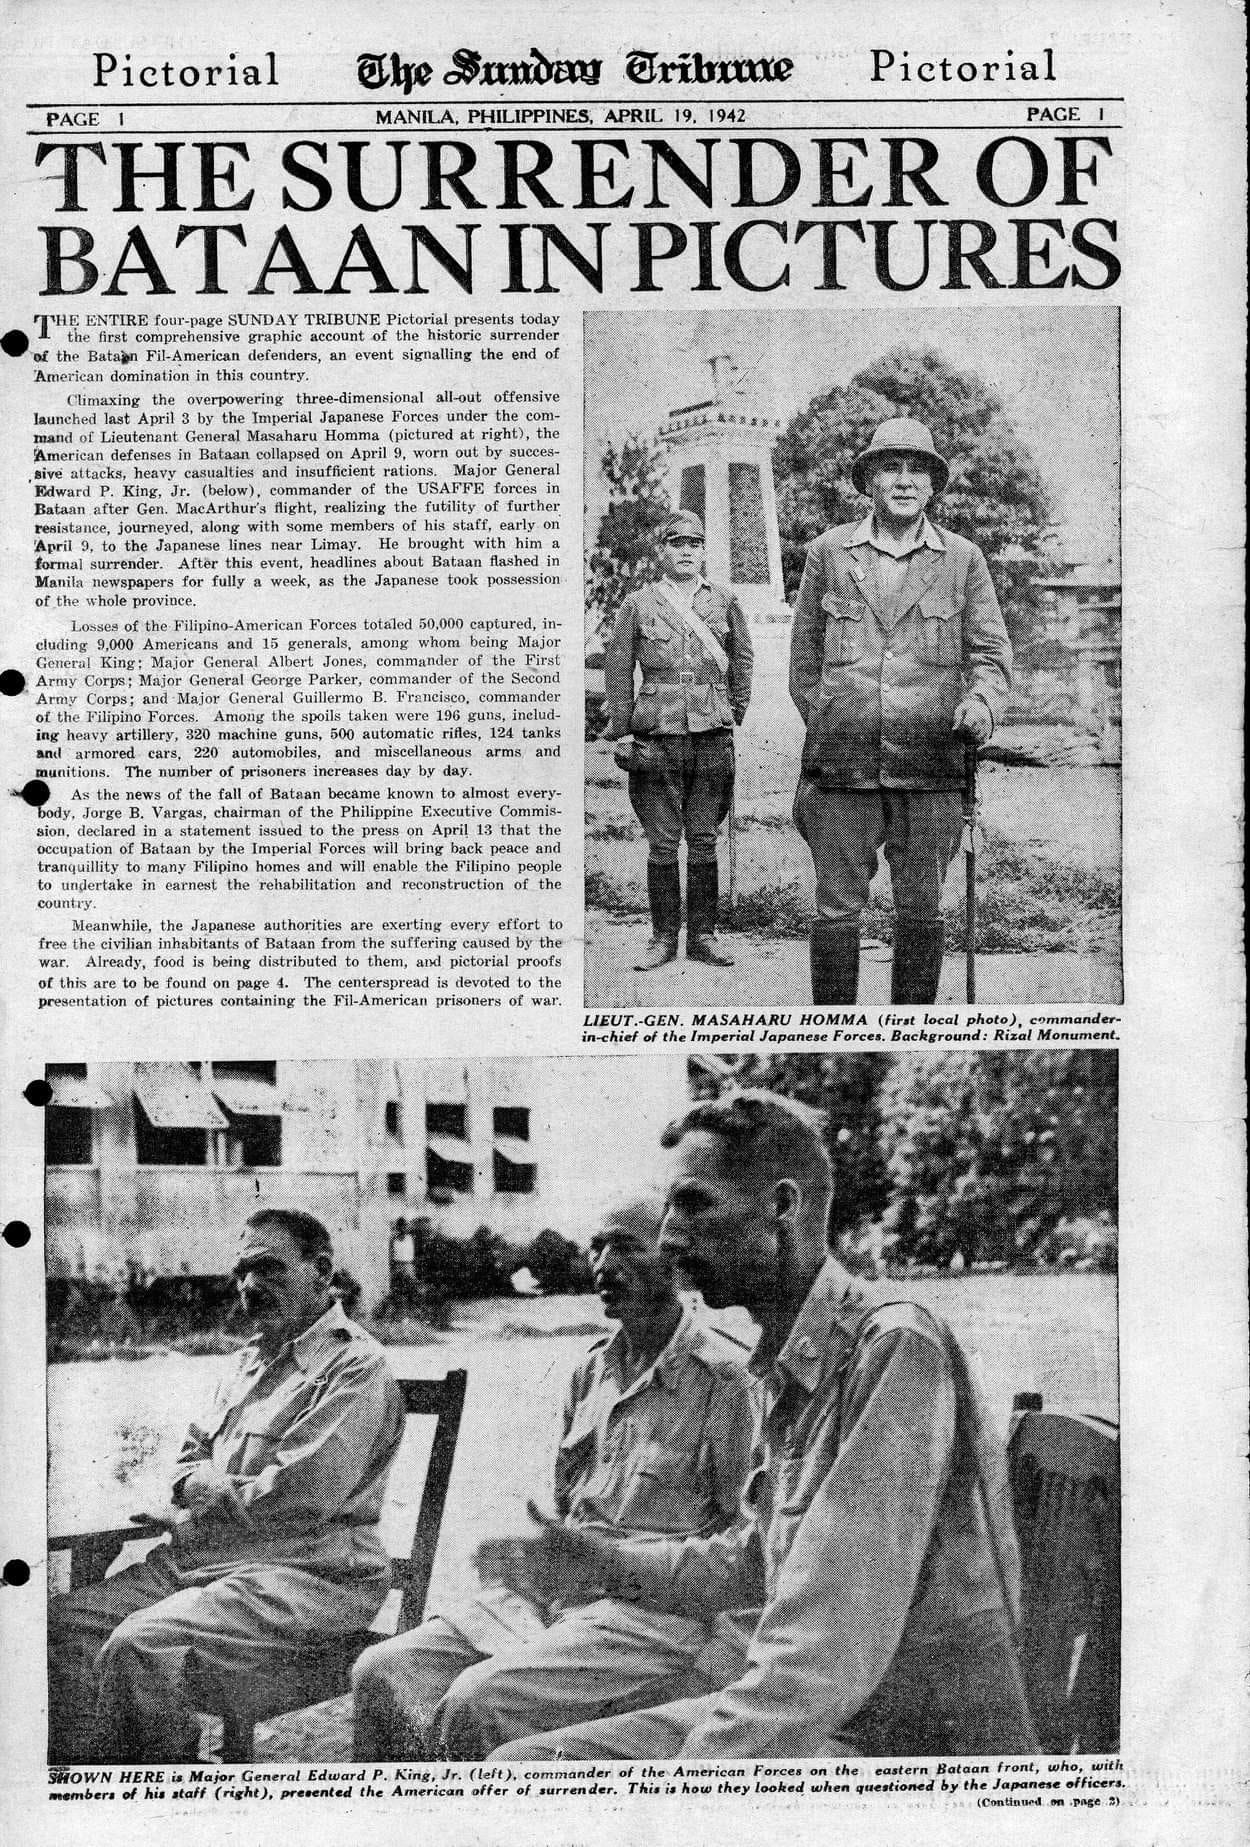 The 19 April 1942 edition of the Sunday Tribune with a pictorial coverage  of the fall of Bataan. : r/Philippines